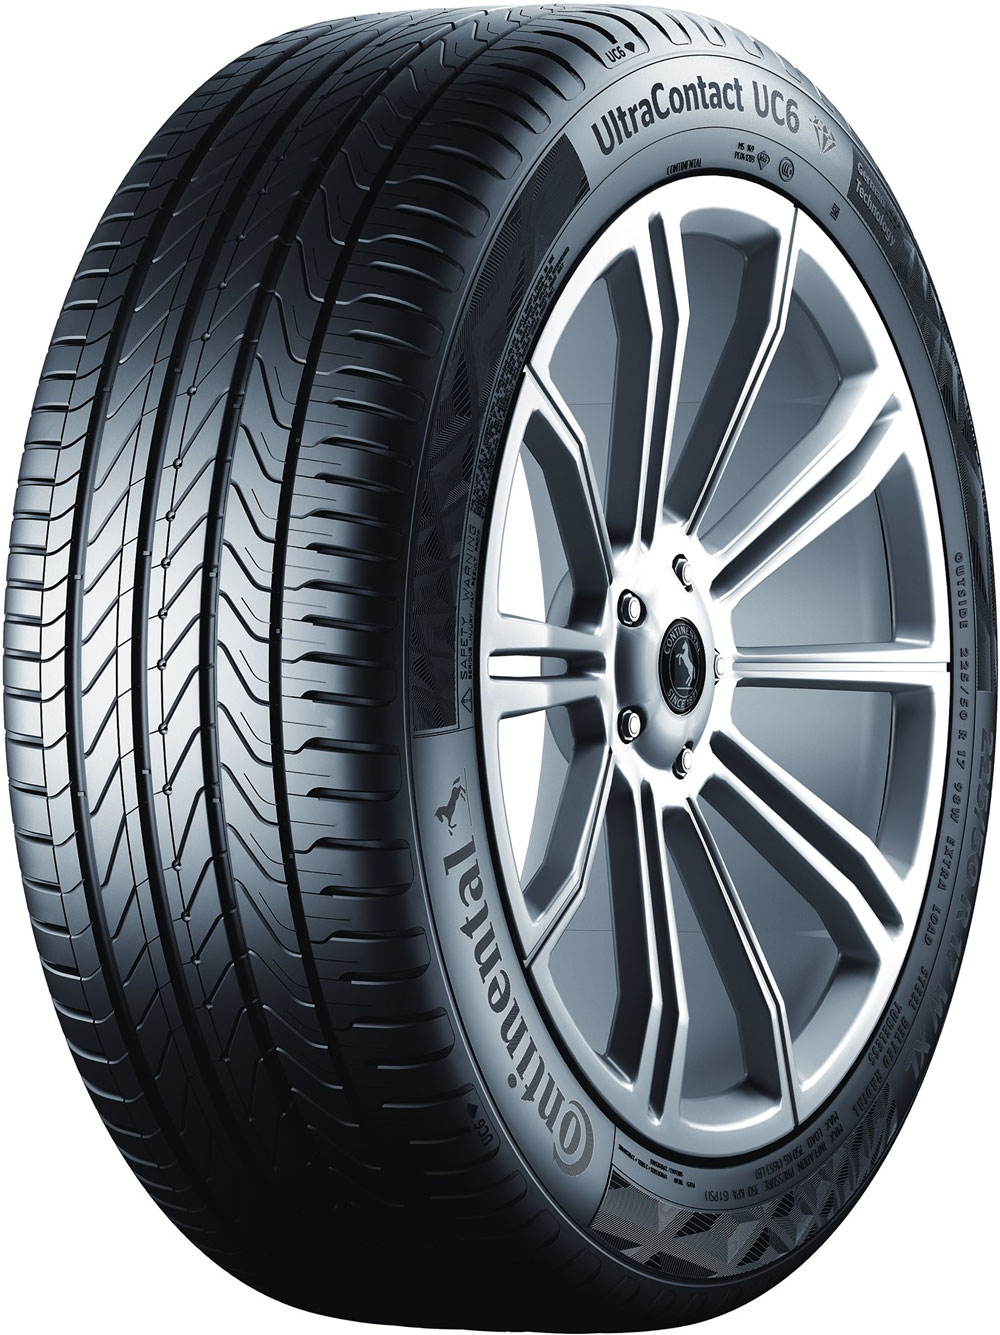 Anvelope auto CONTINENTAL UCXLFR XL 195/45 R16 84V